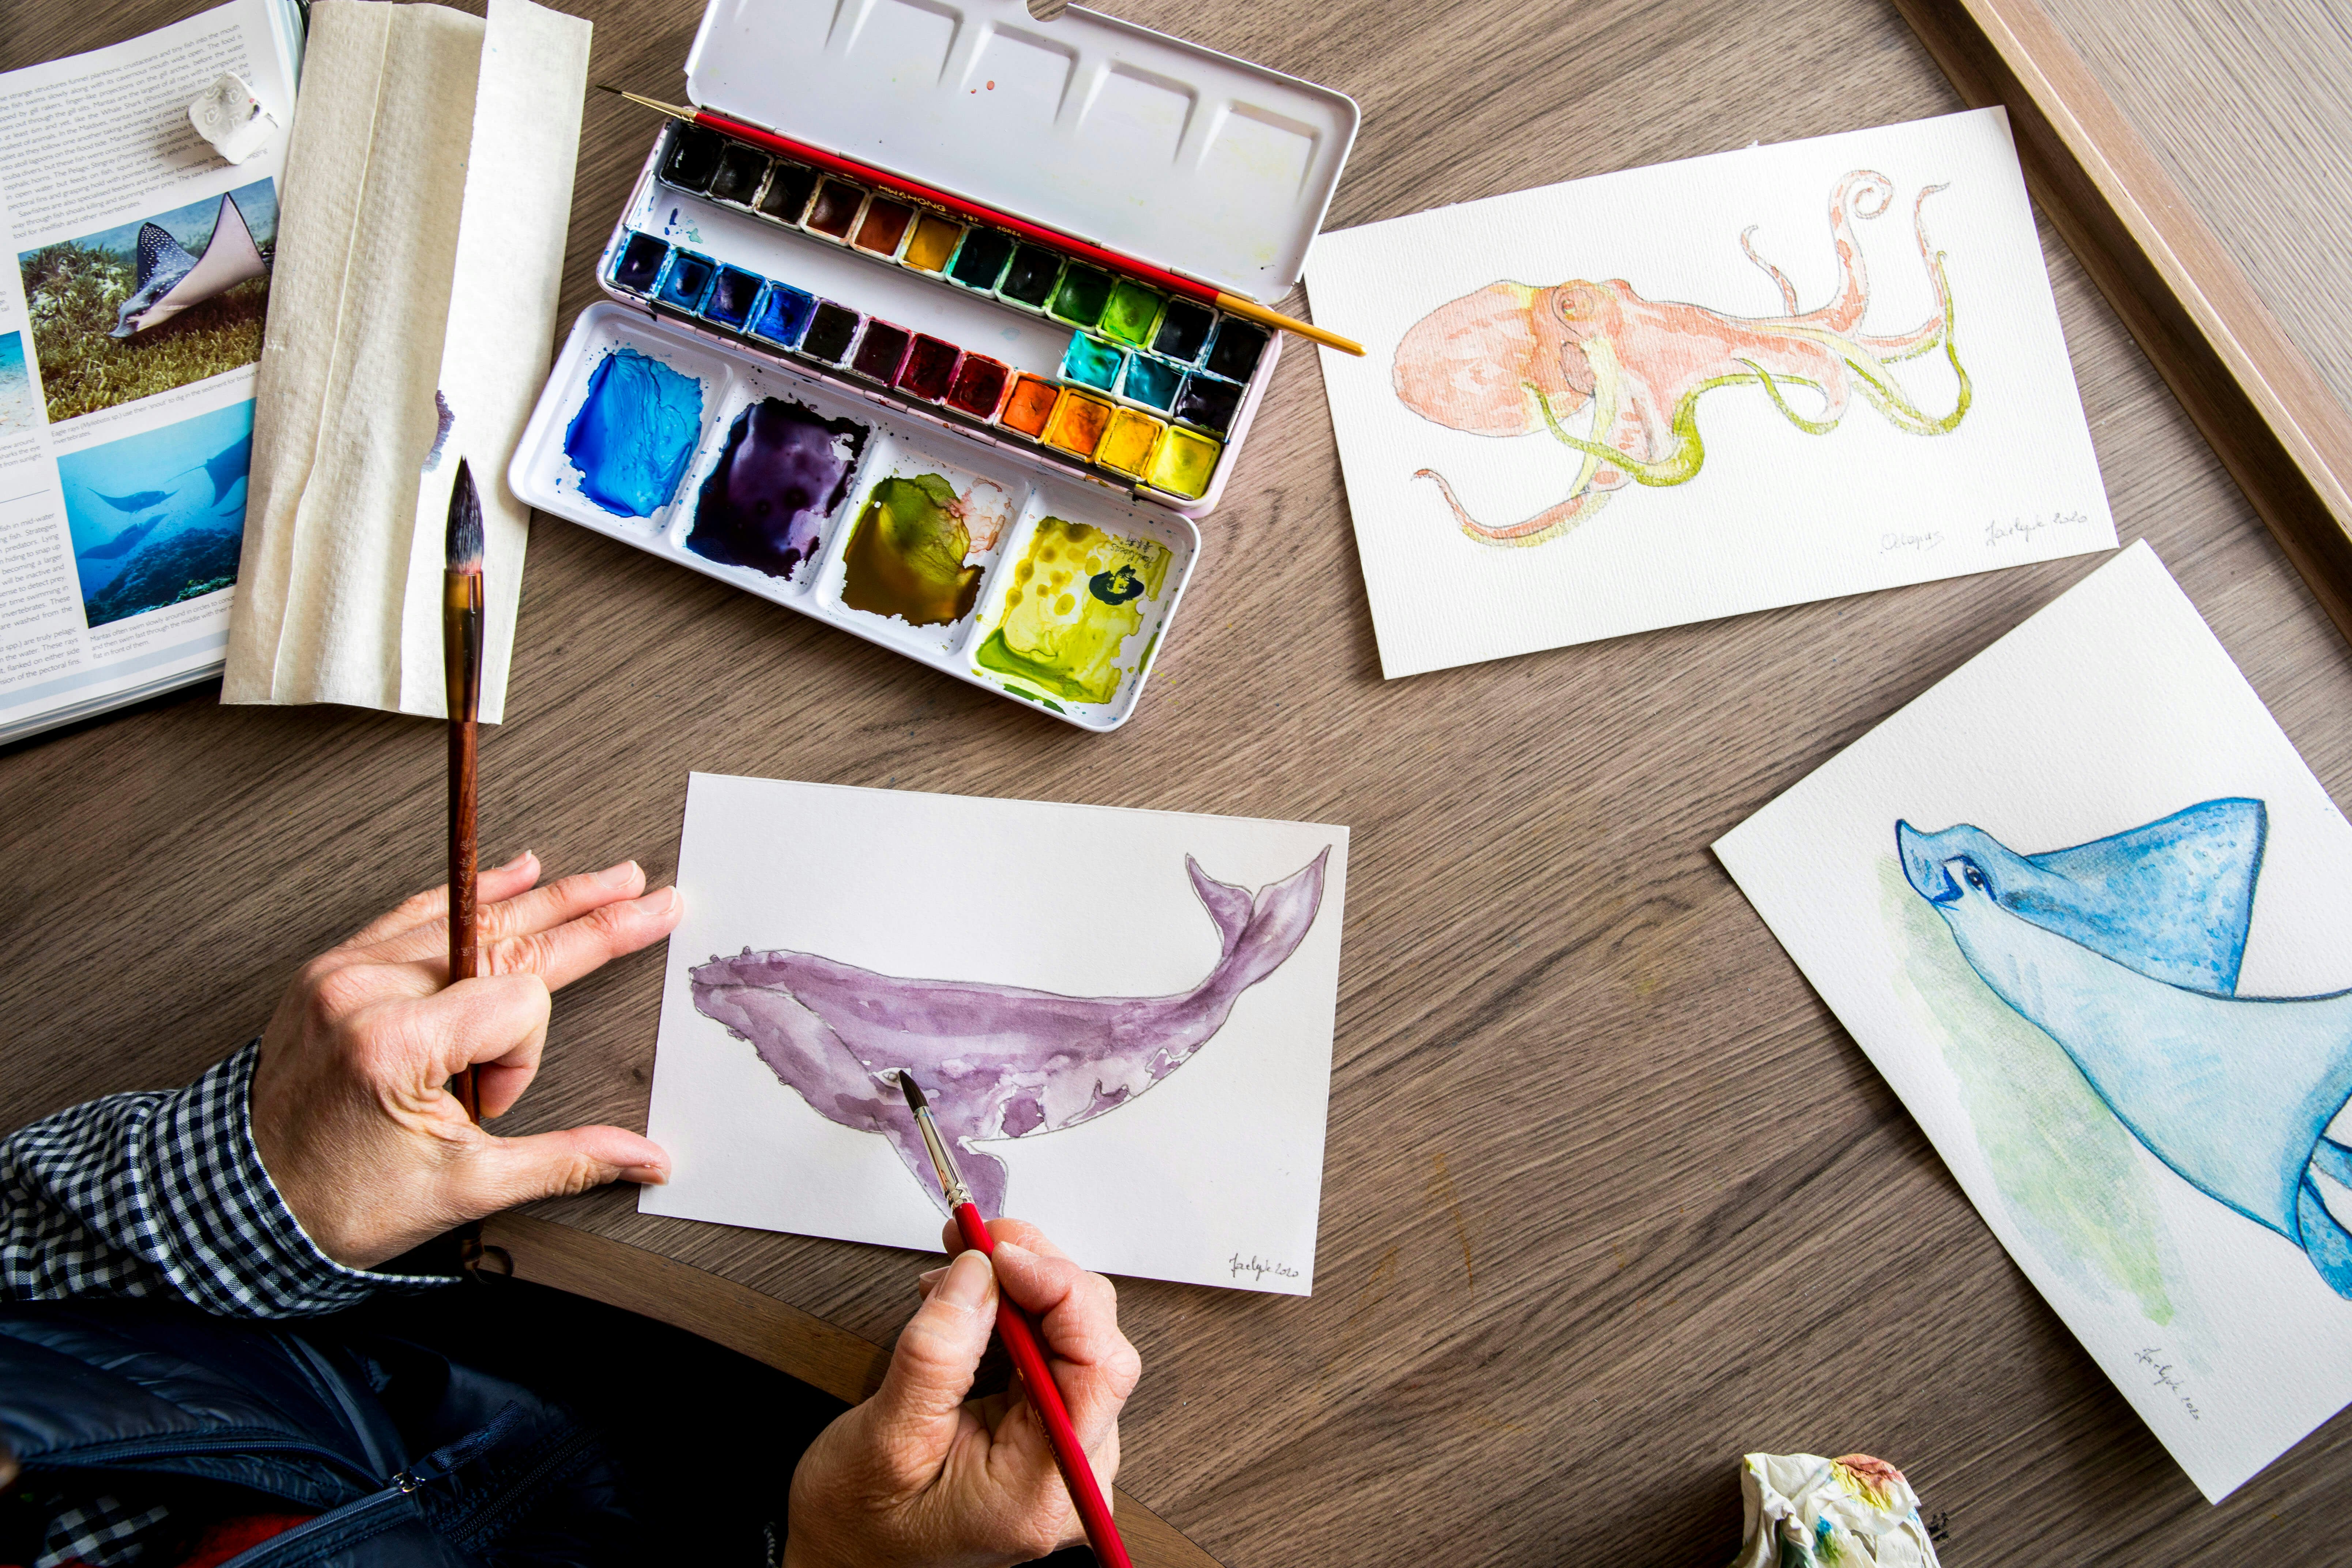 Colourful watercolours of sting rays, whales and an octopus